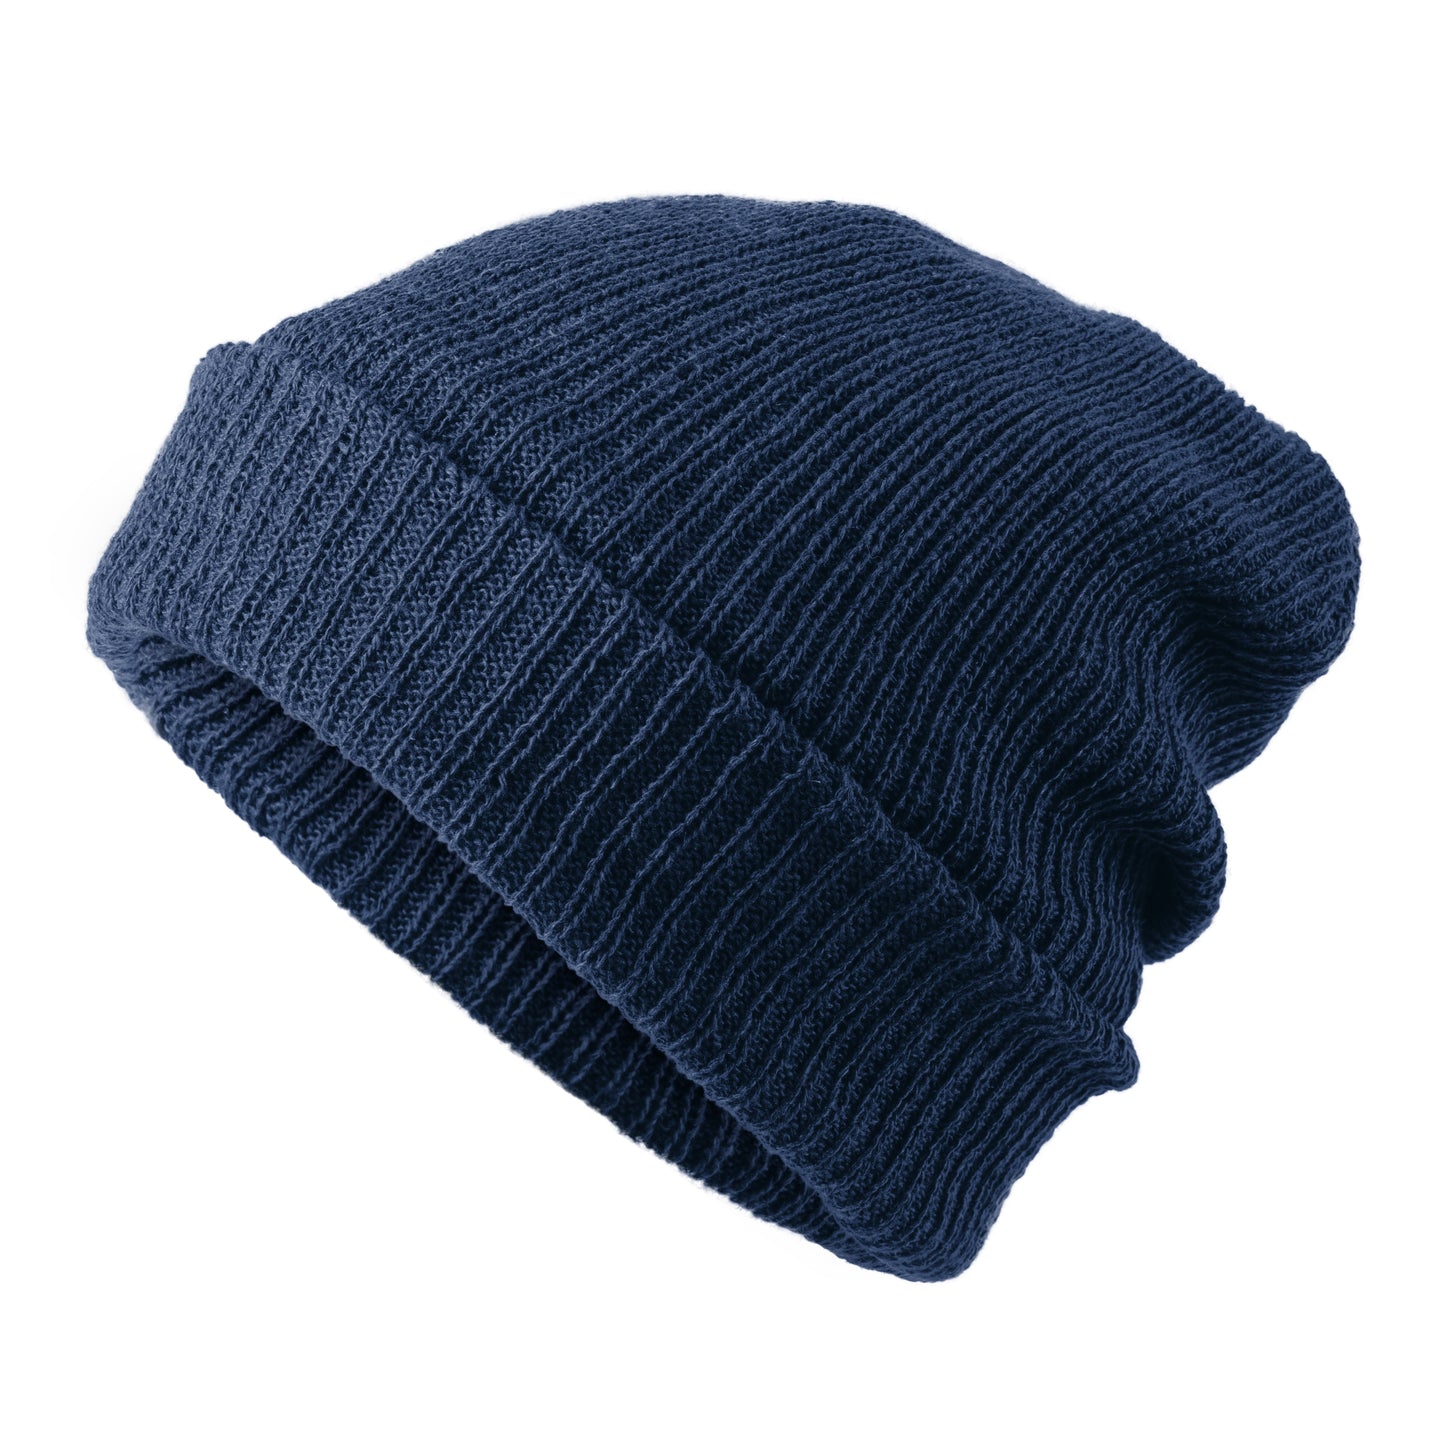 Mens and Women Fleece Lined Beanie Hat - Cold Winter Hat